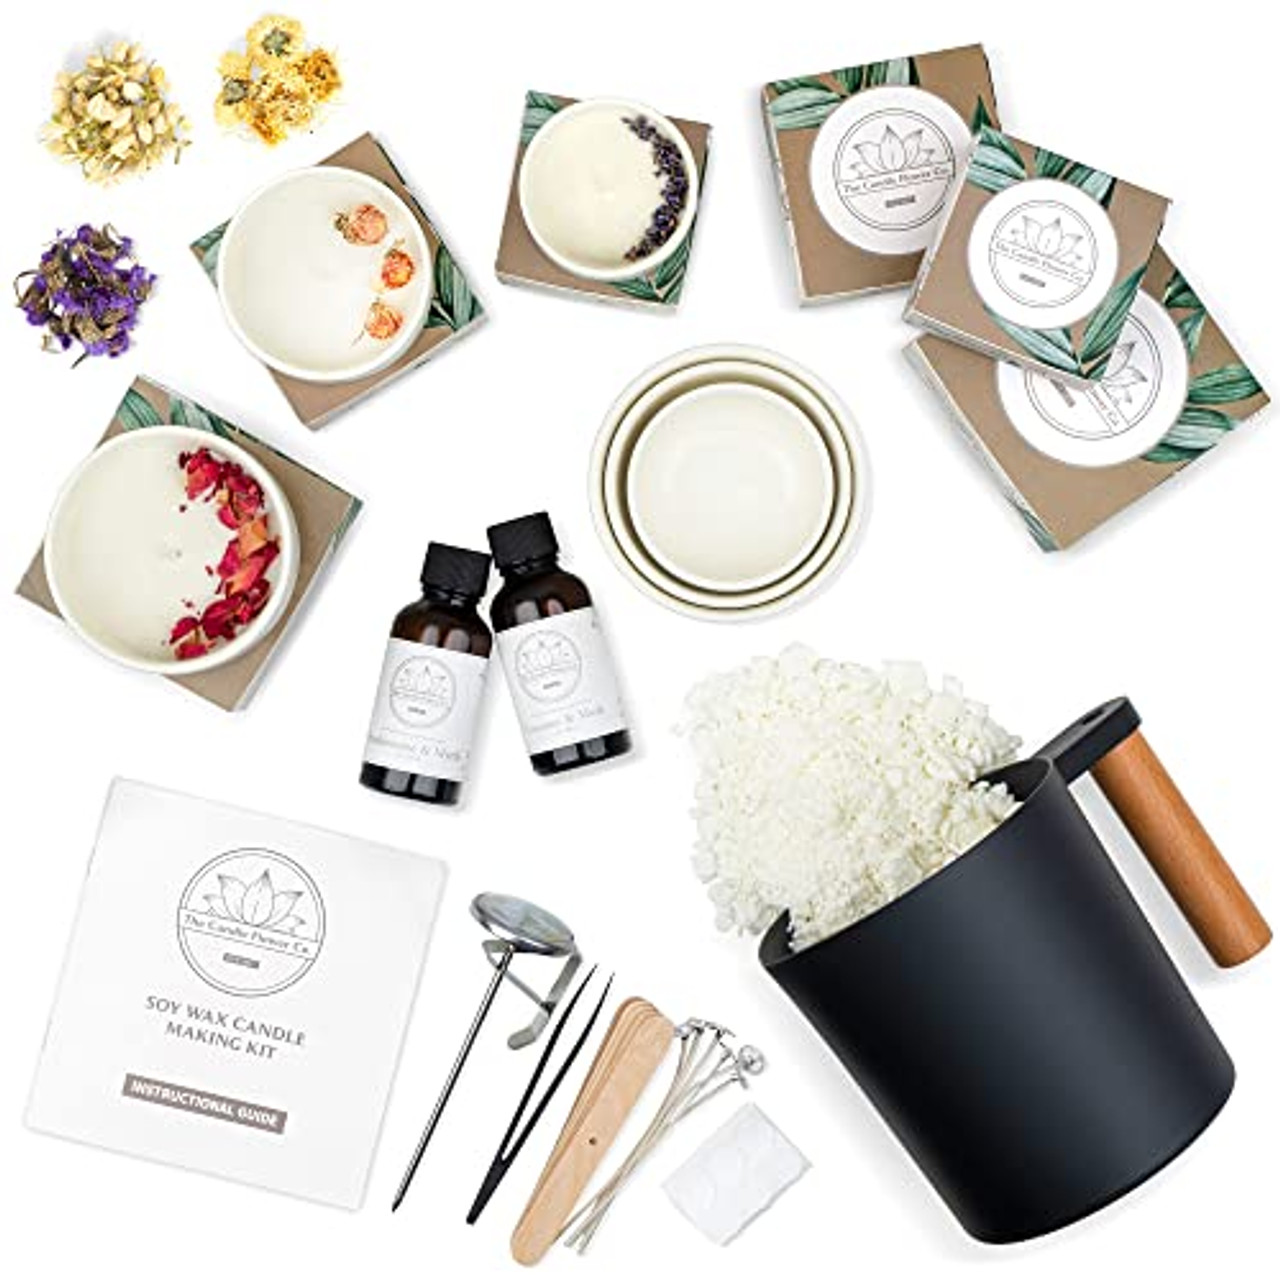 Hearth & Harbor Natural Soy Candle Making Kit for Adults, DIY Candle Making  Kit for Kids with Dried Flowers for Candle Making, 50 Piece Make Your Own